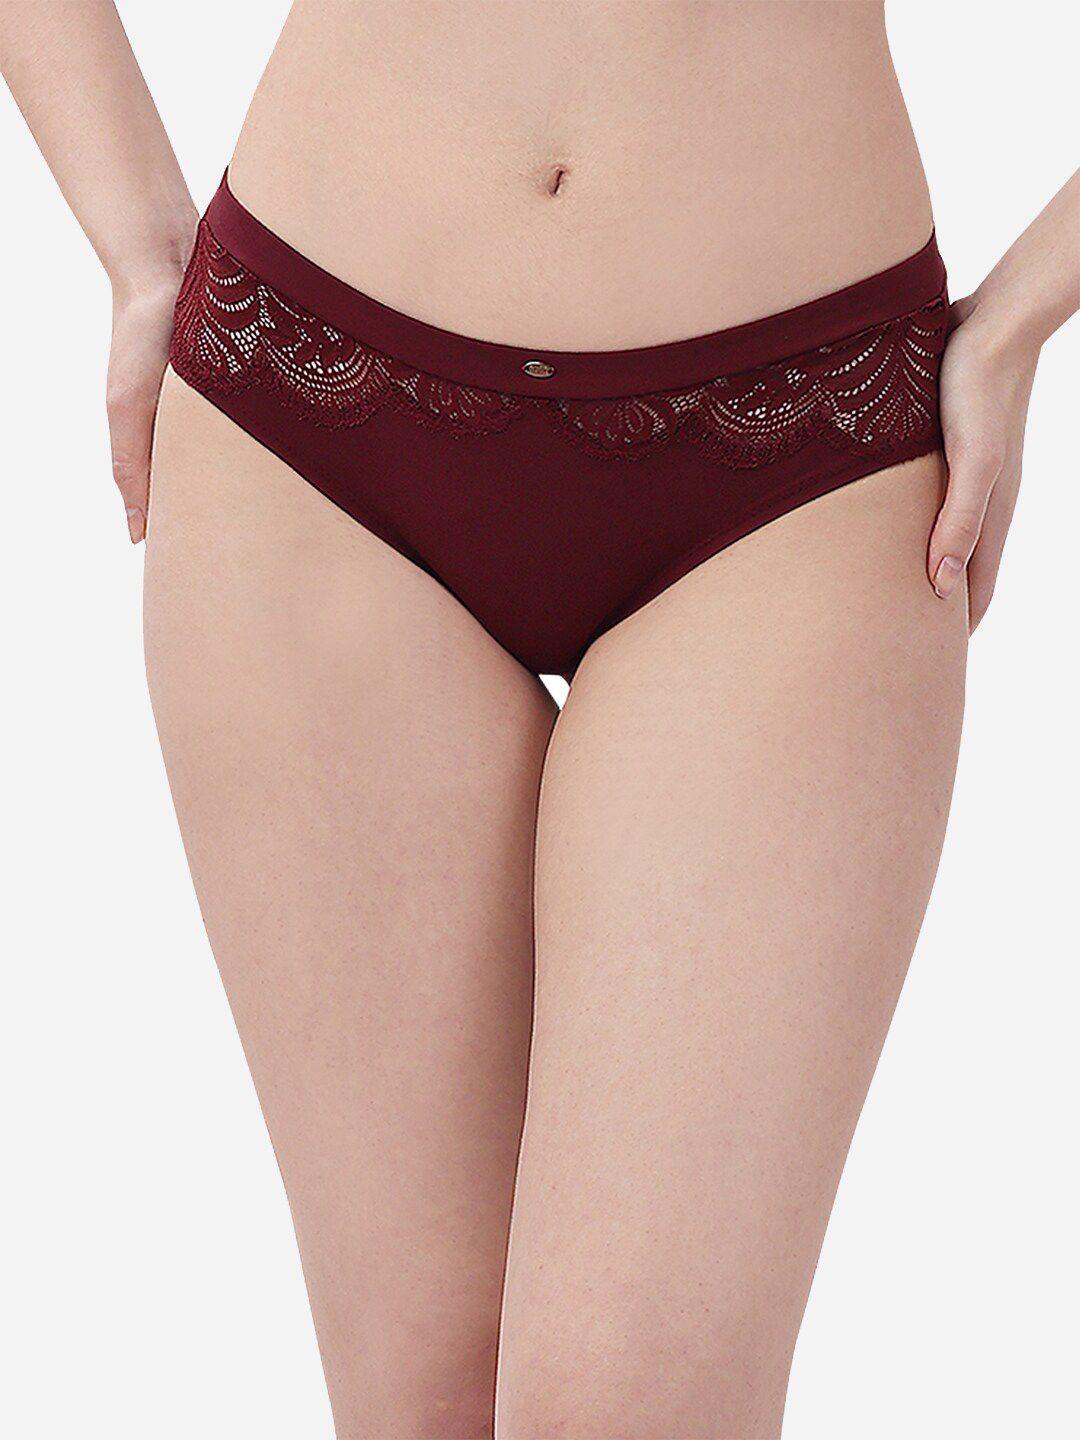 soie-women-high-waist-inner-elastic-full-coverage-laced-hipster-brief